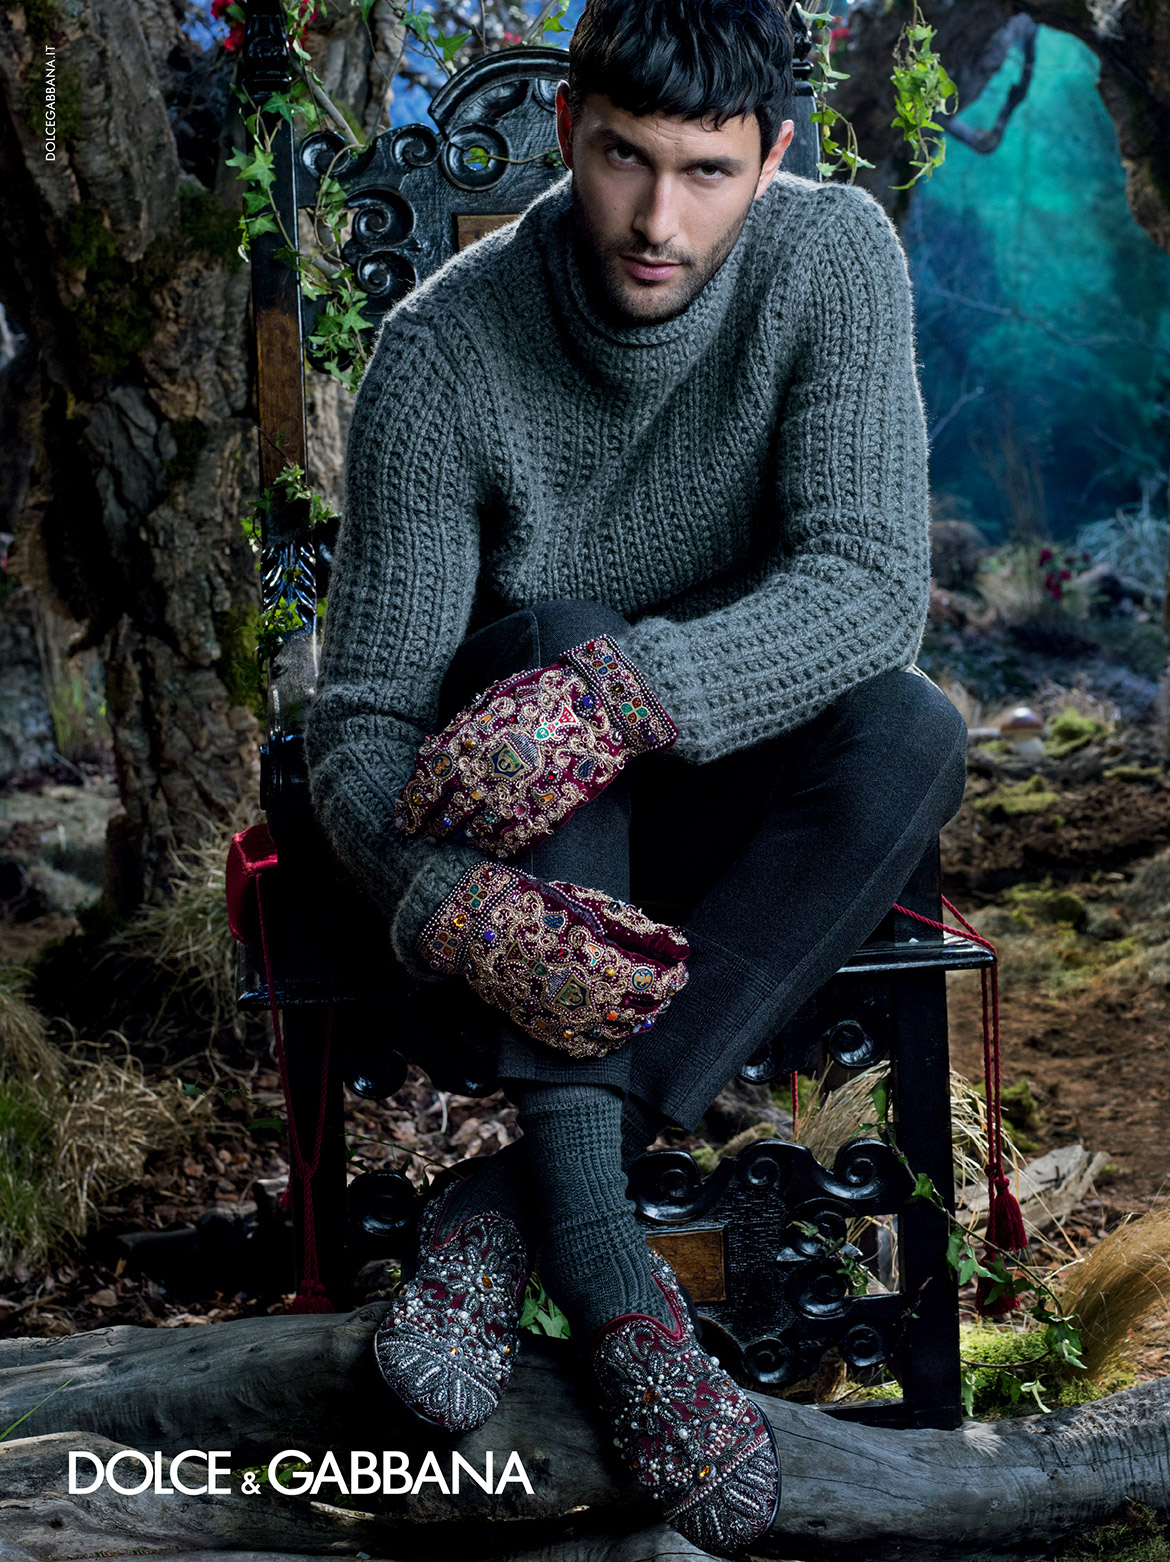 Noah Mills for Dolce & Gabbana - The Man Has Style